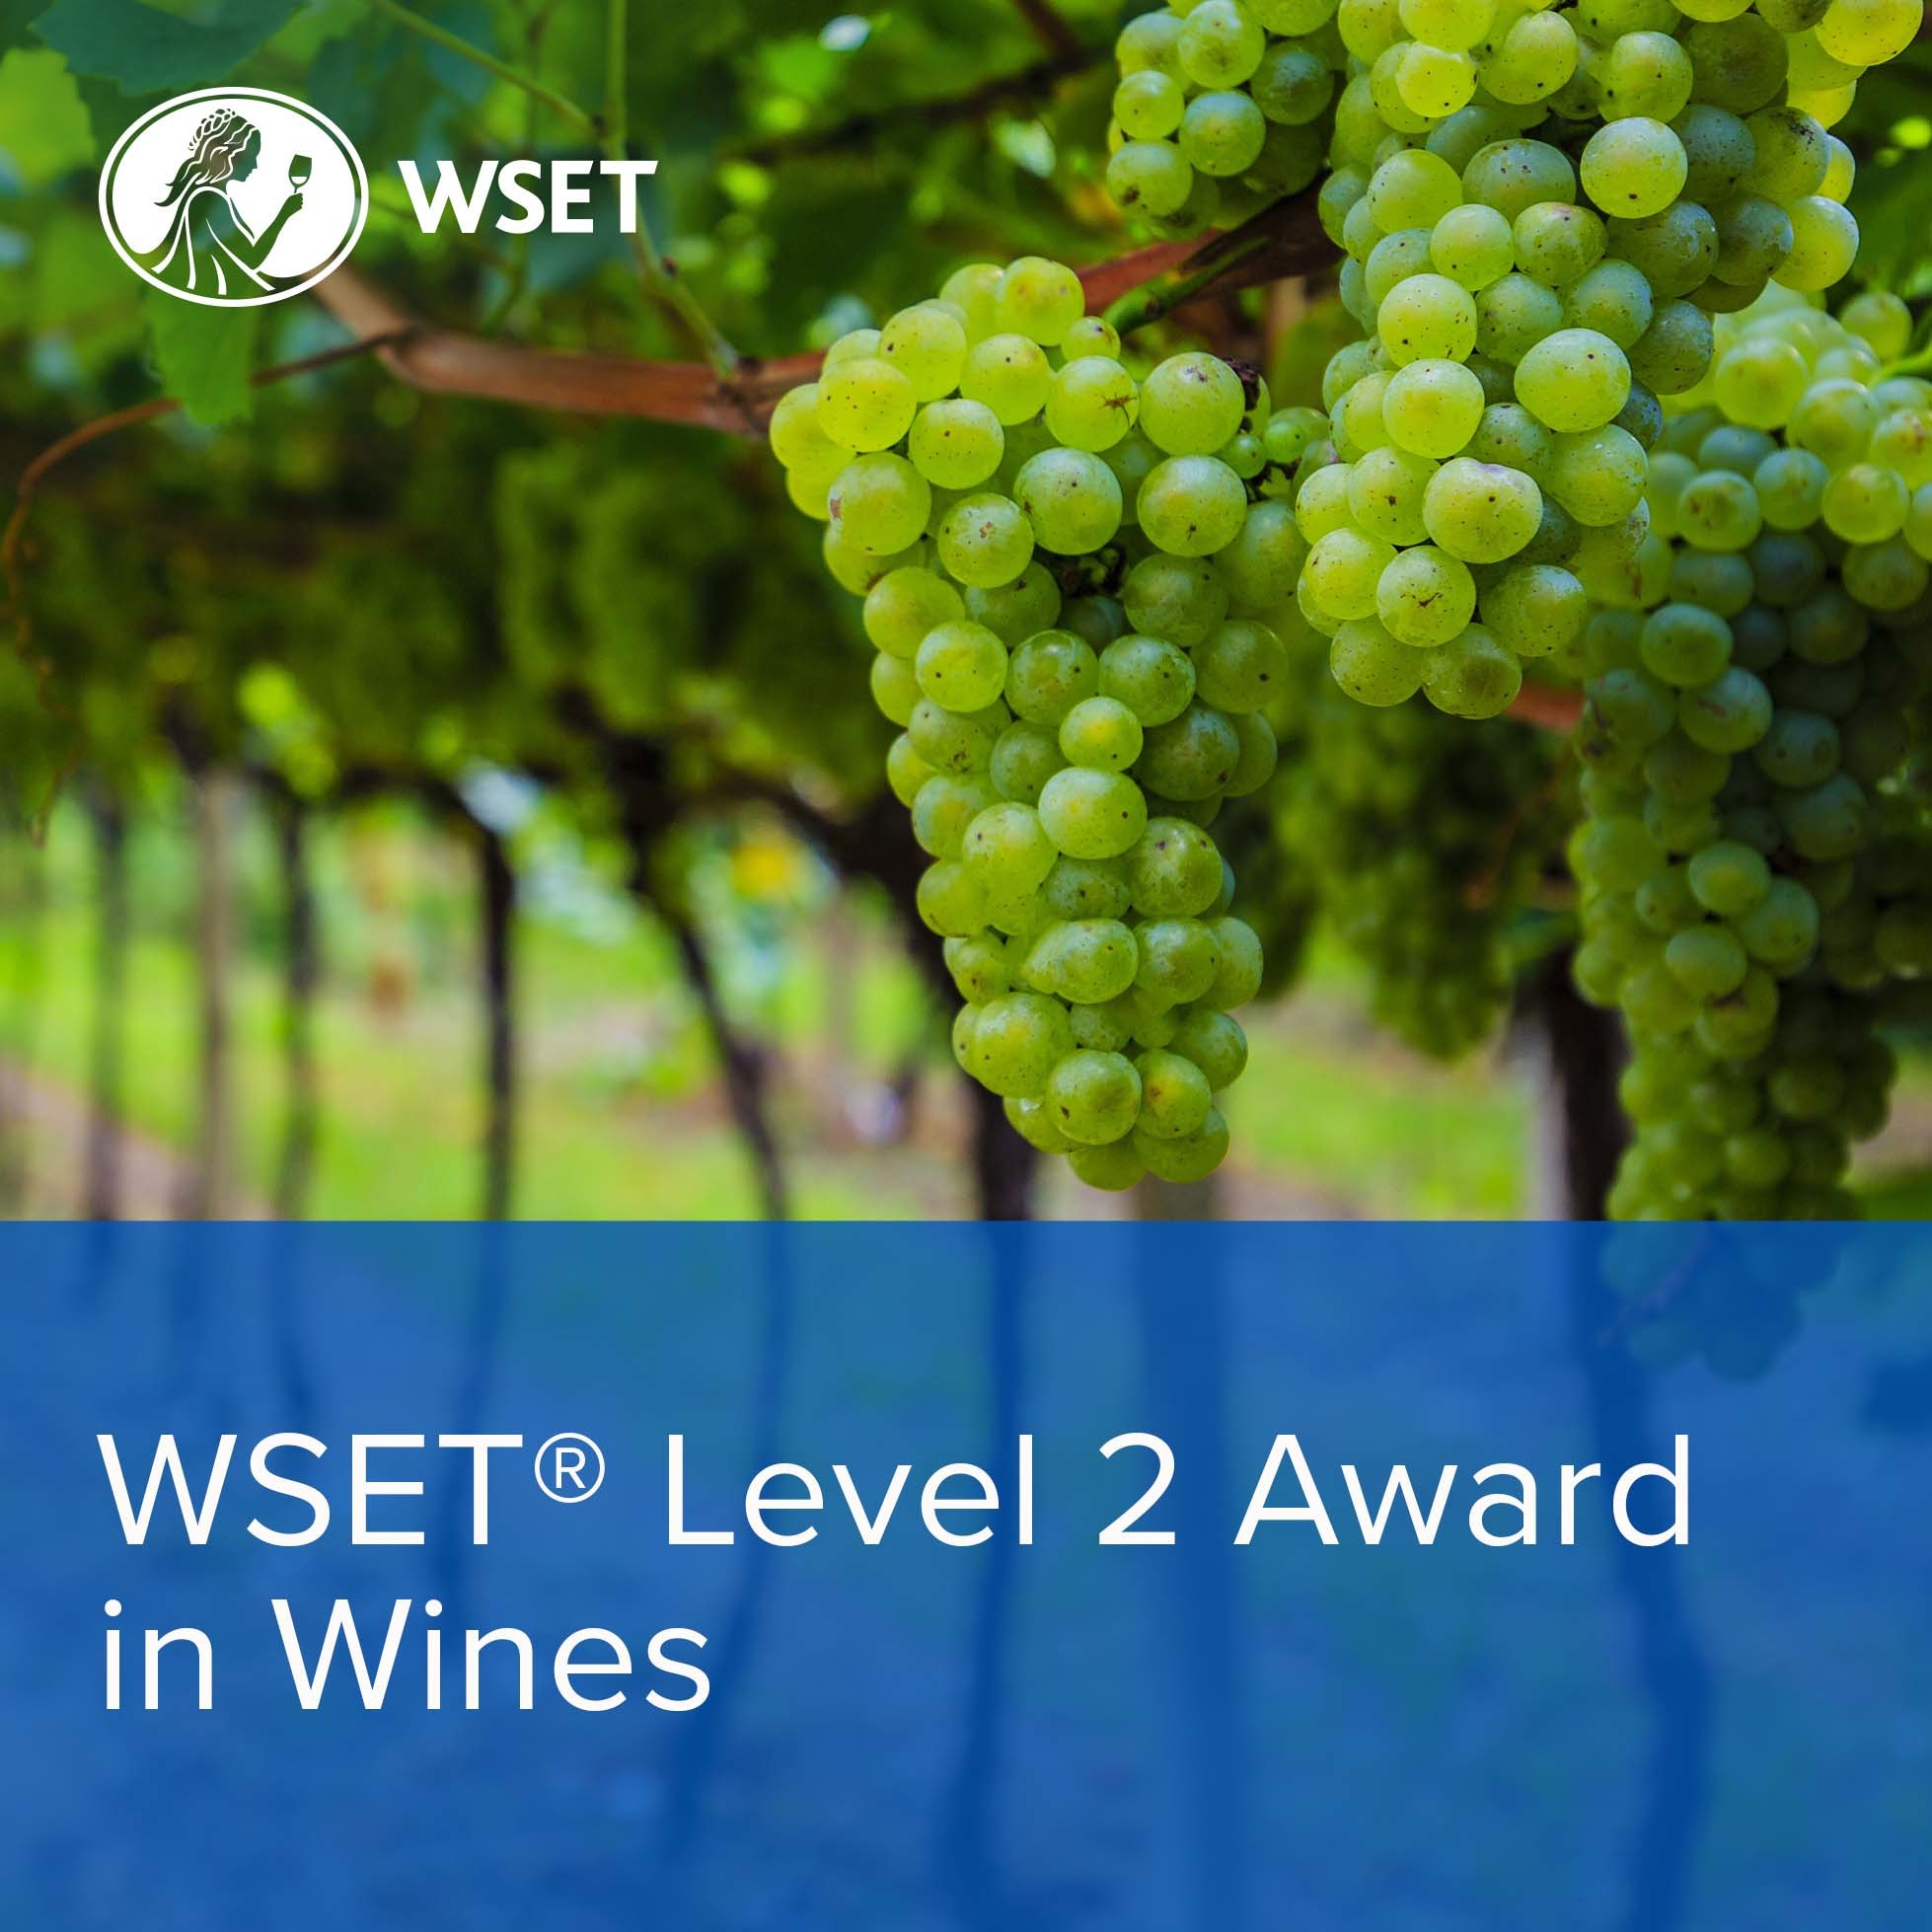  WSET Level 2 Award in Wines Course: Saturday Format (Classroom)   